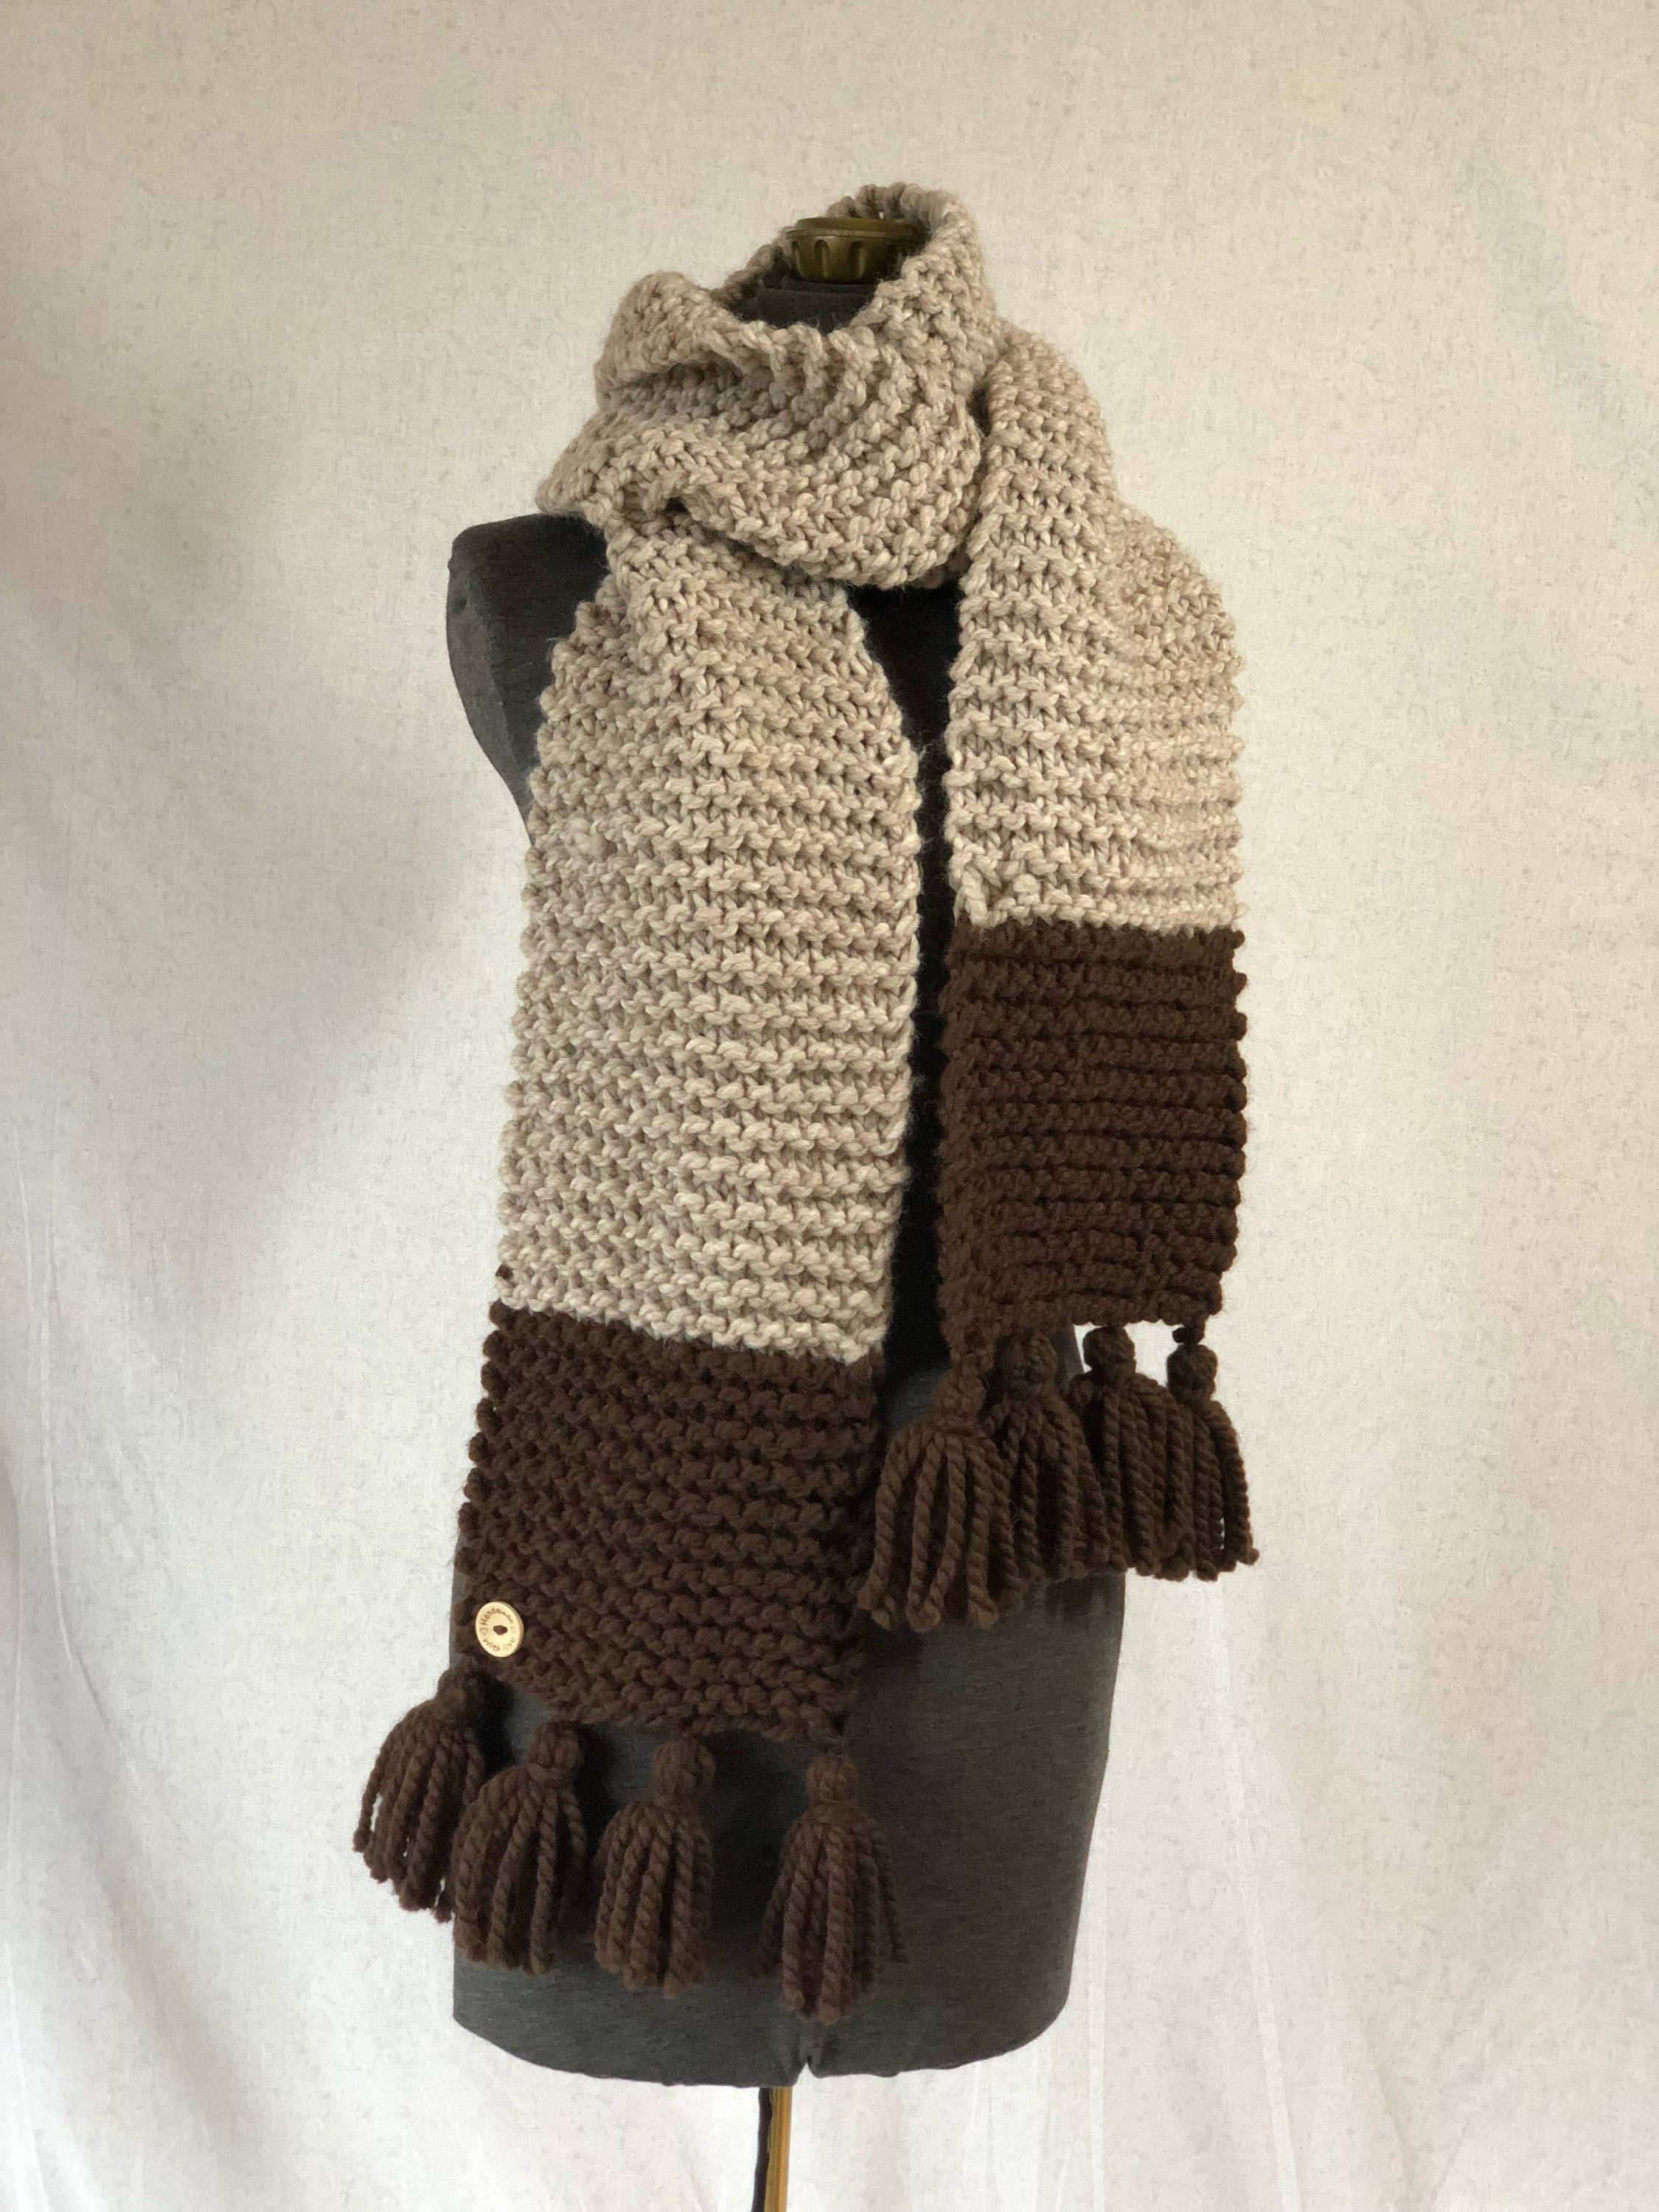 Warm Wool Blend Winter Super Scarf Perfect For Winter Warm, Extra Long With Color Block Detailing . Brown Scarf Tassel